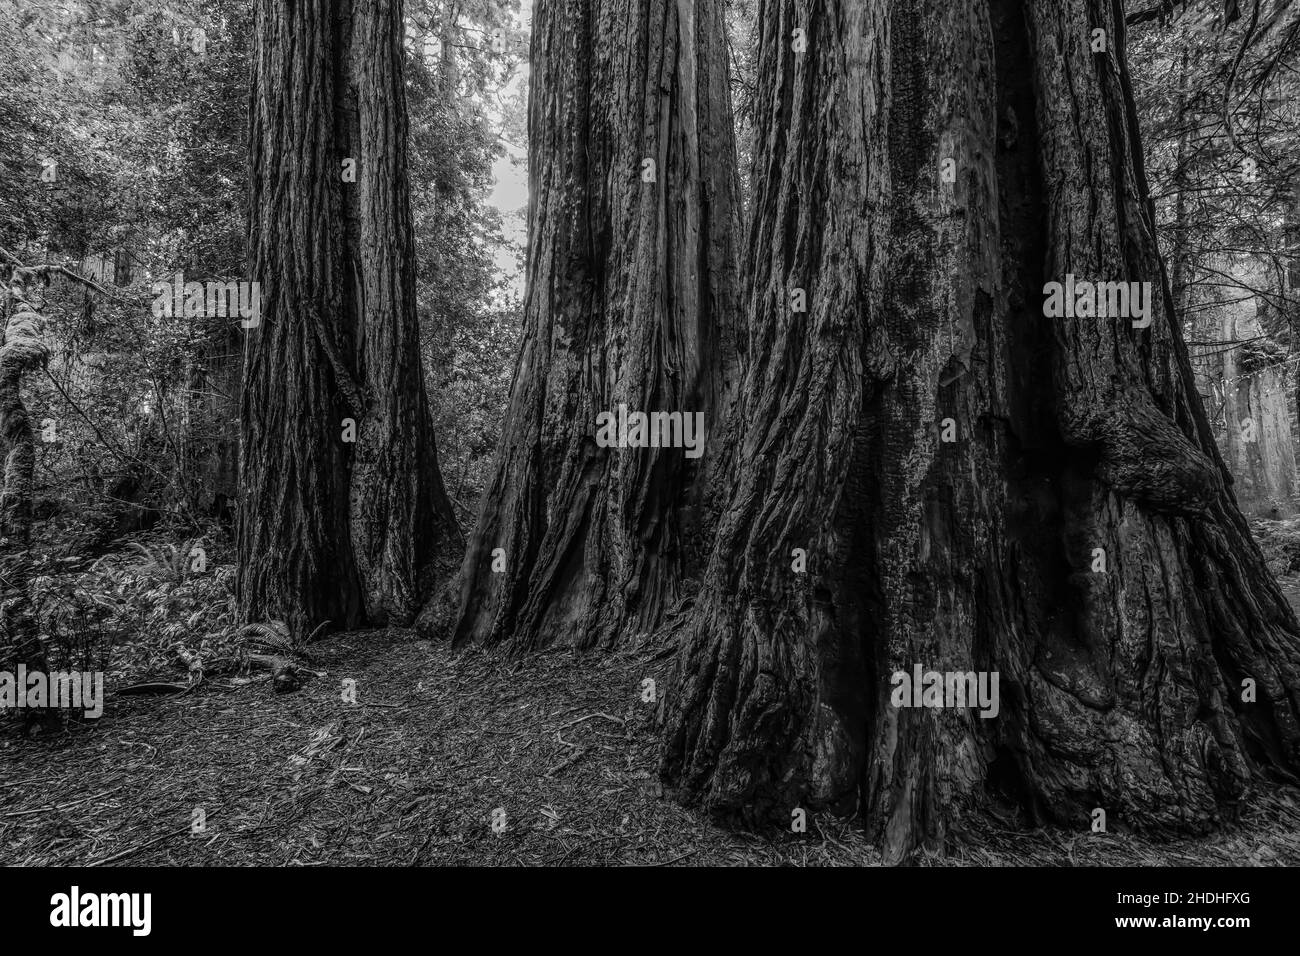 Lady Bird Johnson Grove of Coast Redwoods, Sequoia sempervirens, Redwood National and State Parks, California, USA Stock Photo